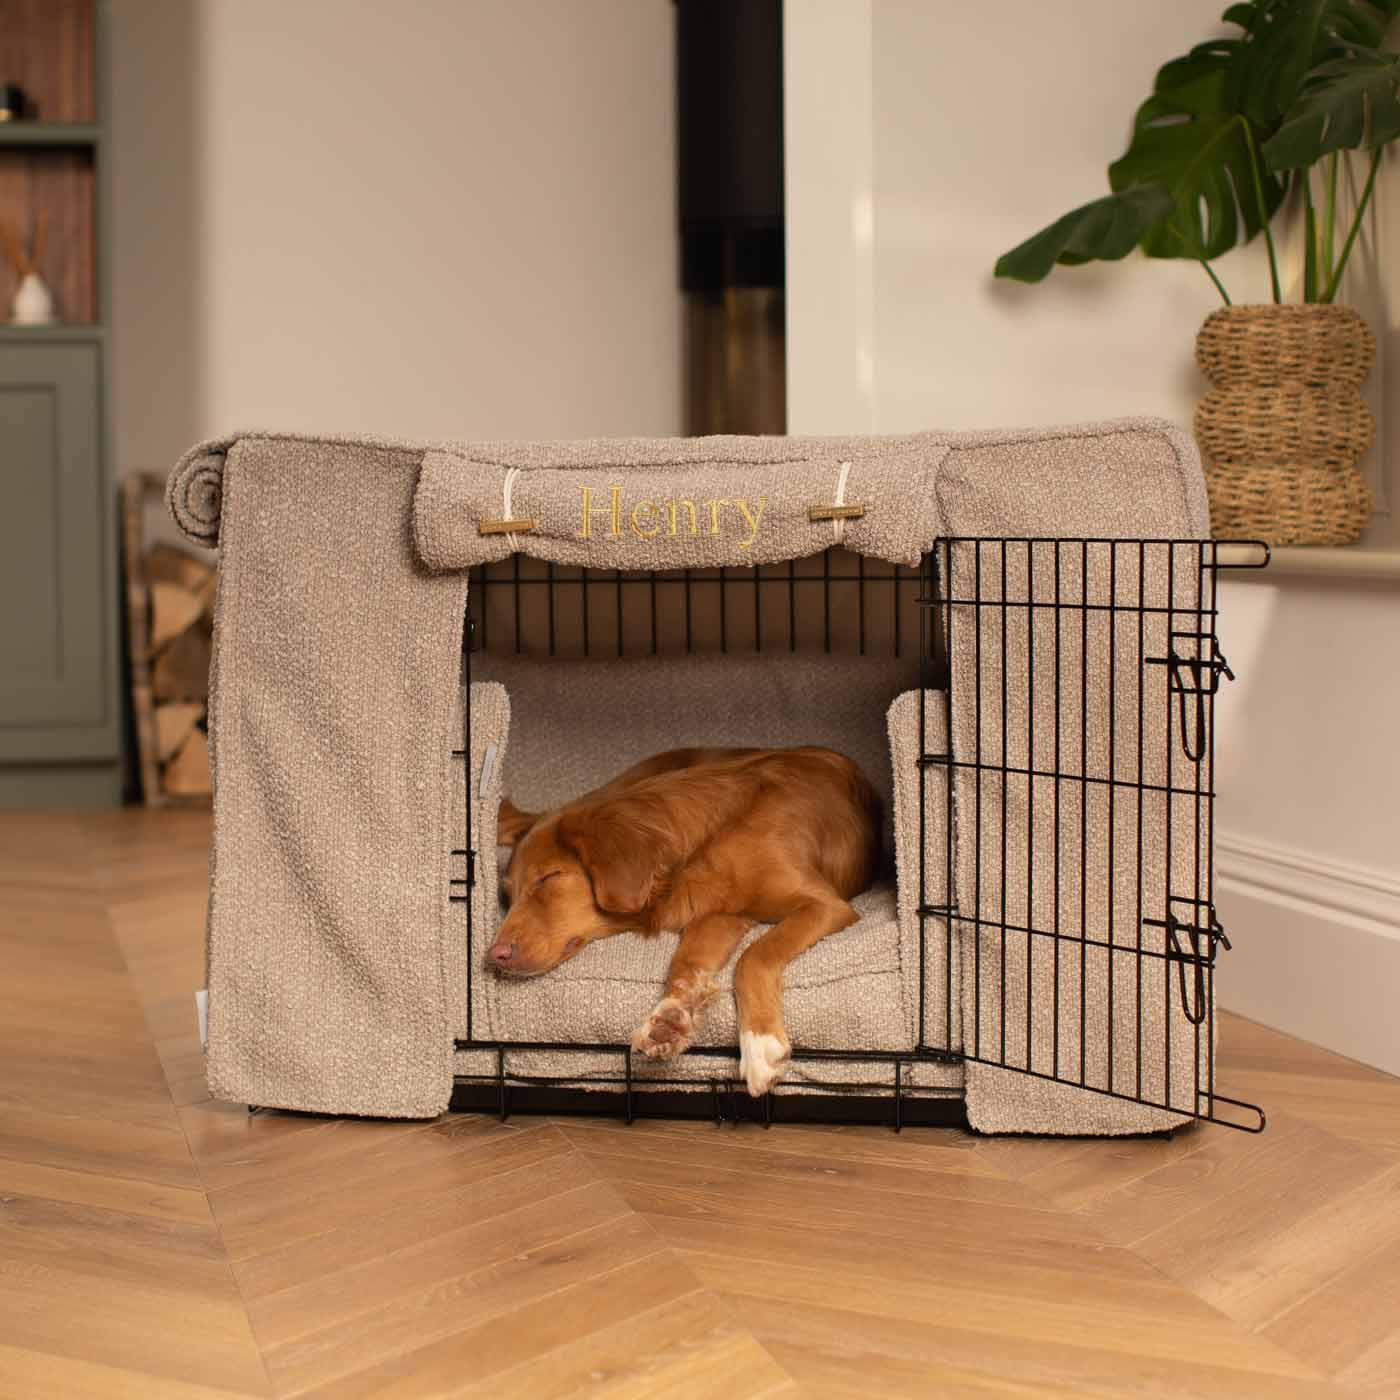 Luxury Heavy Duty Dog Cage, In Stunning Mink Bouclé Cage Set, The Perfect Dog Cage Set For Building The Ultimate Pet Den! Dog Cage Cover Available To Personalize at Lords & Labradors US